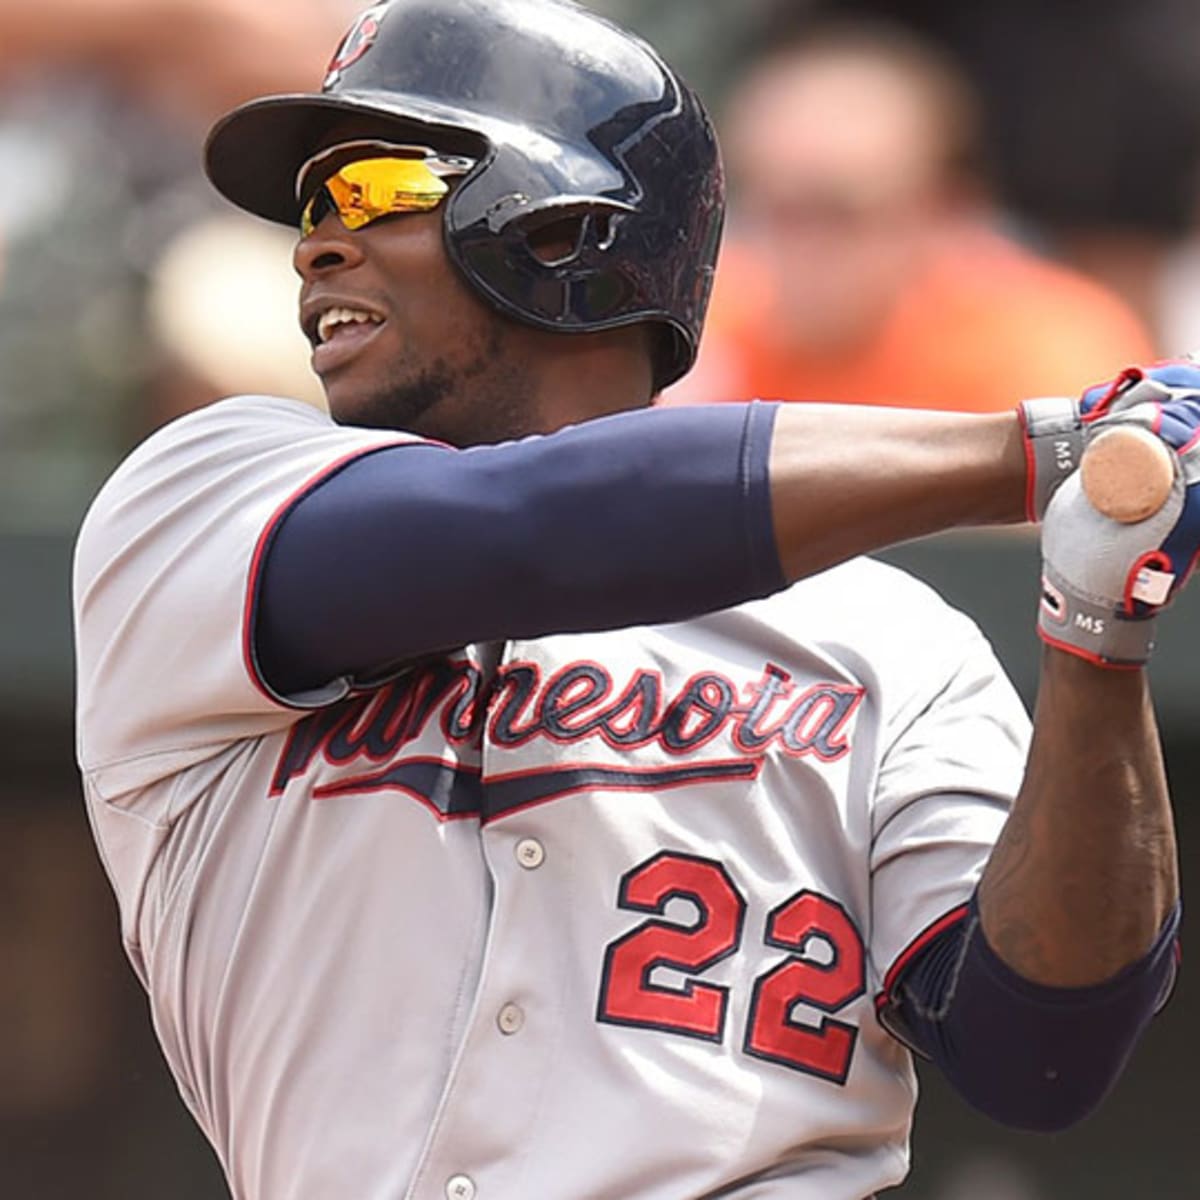 Is Miguel Sano the next top power-hitting prospect?